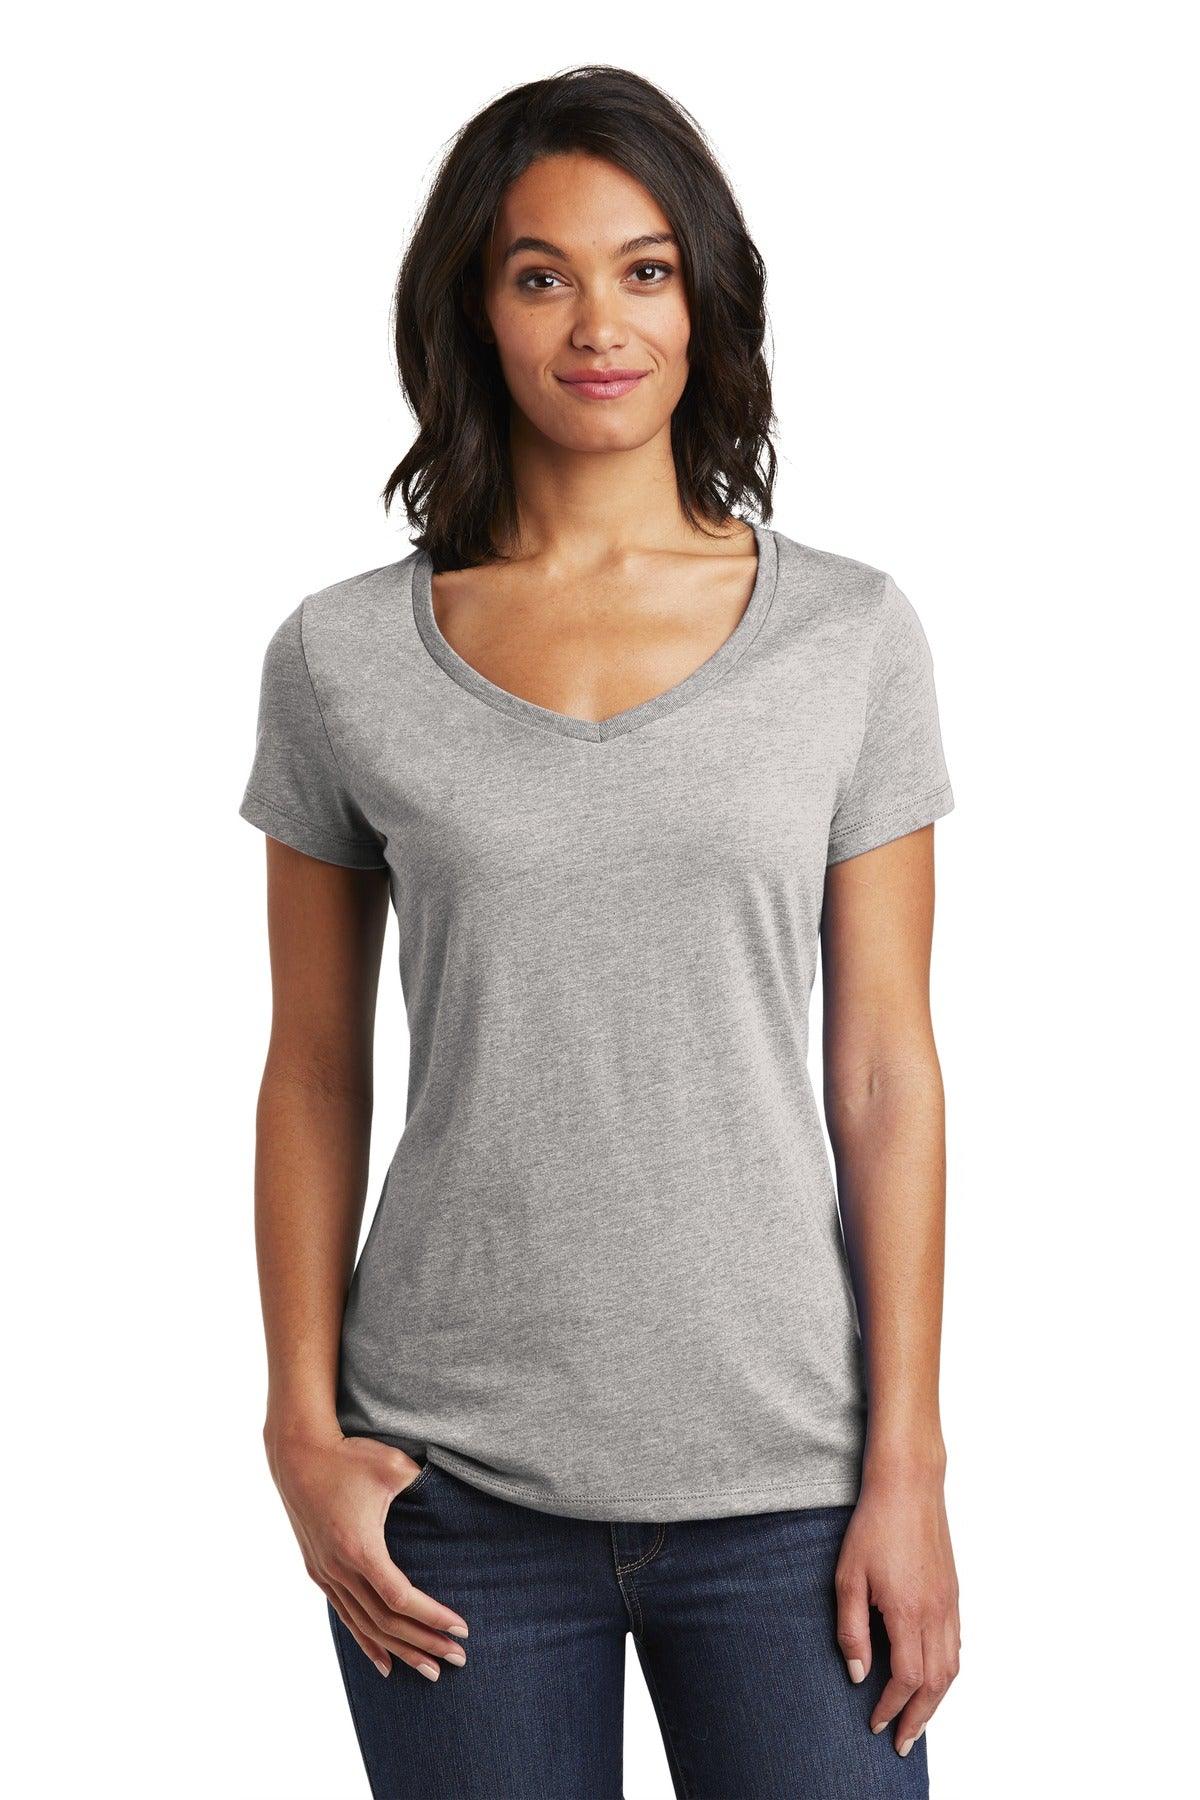 District Women's Very Important Tee V-Neck. DT6503 - Dresses Max